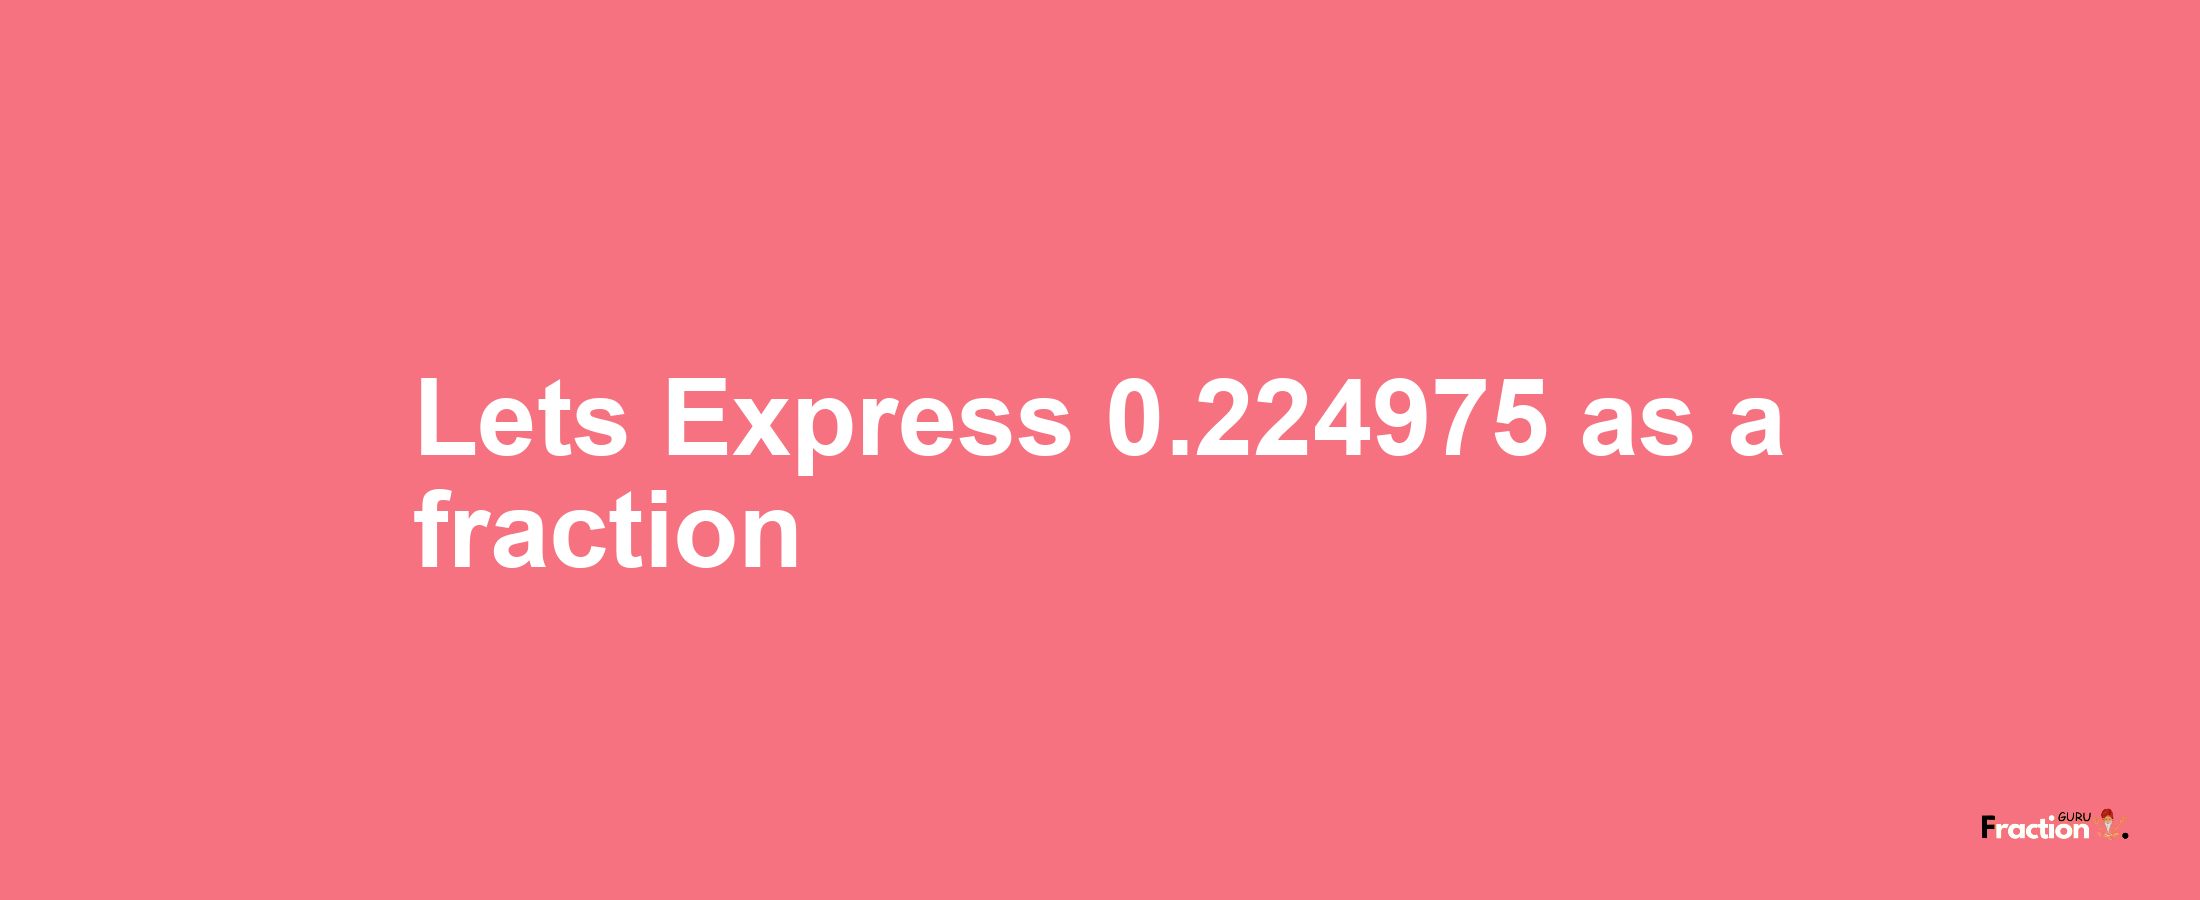 Lets Express 0.224975 as afraction